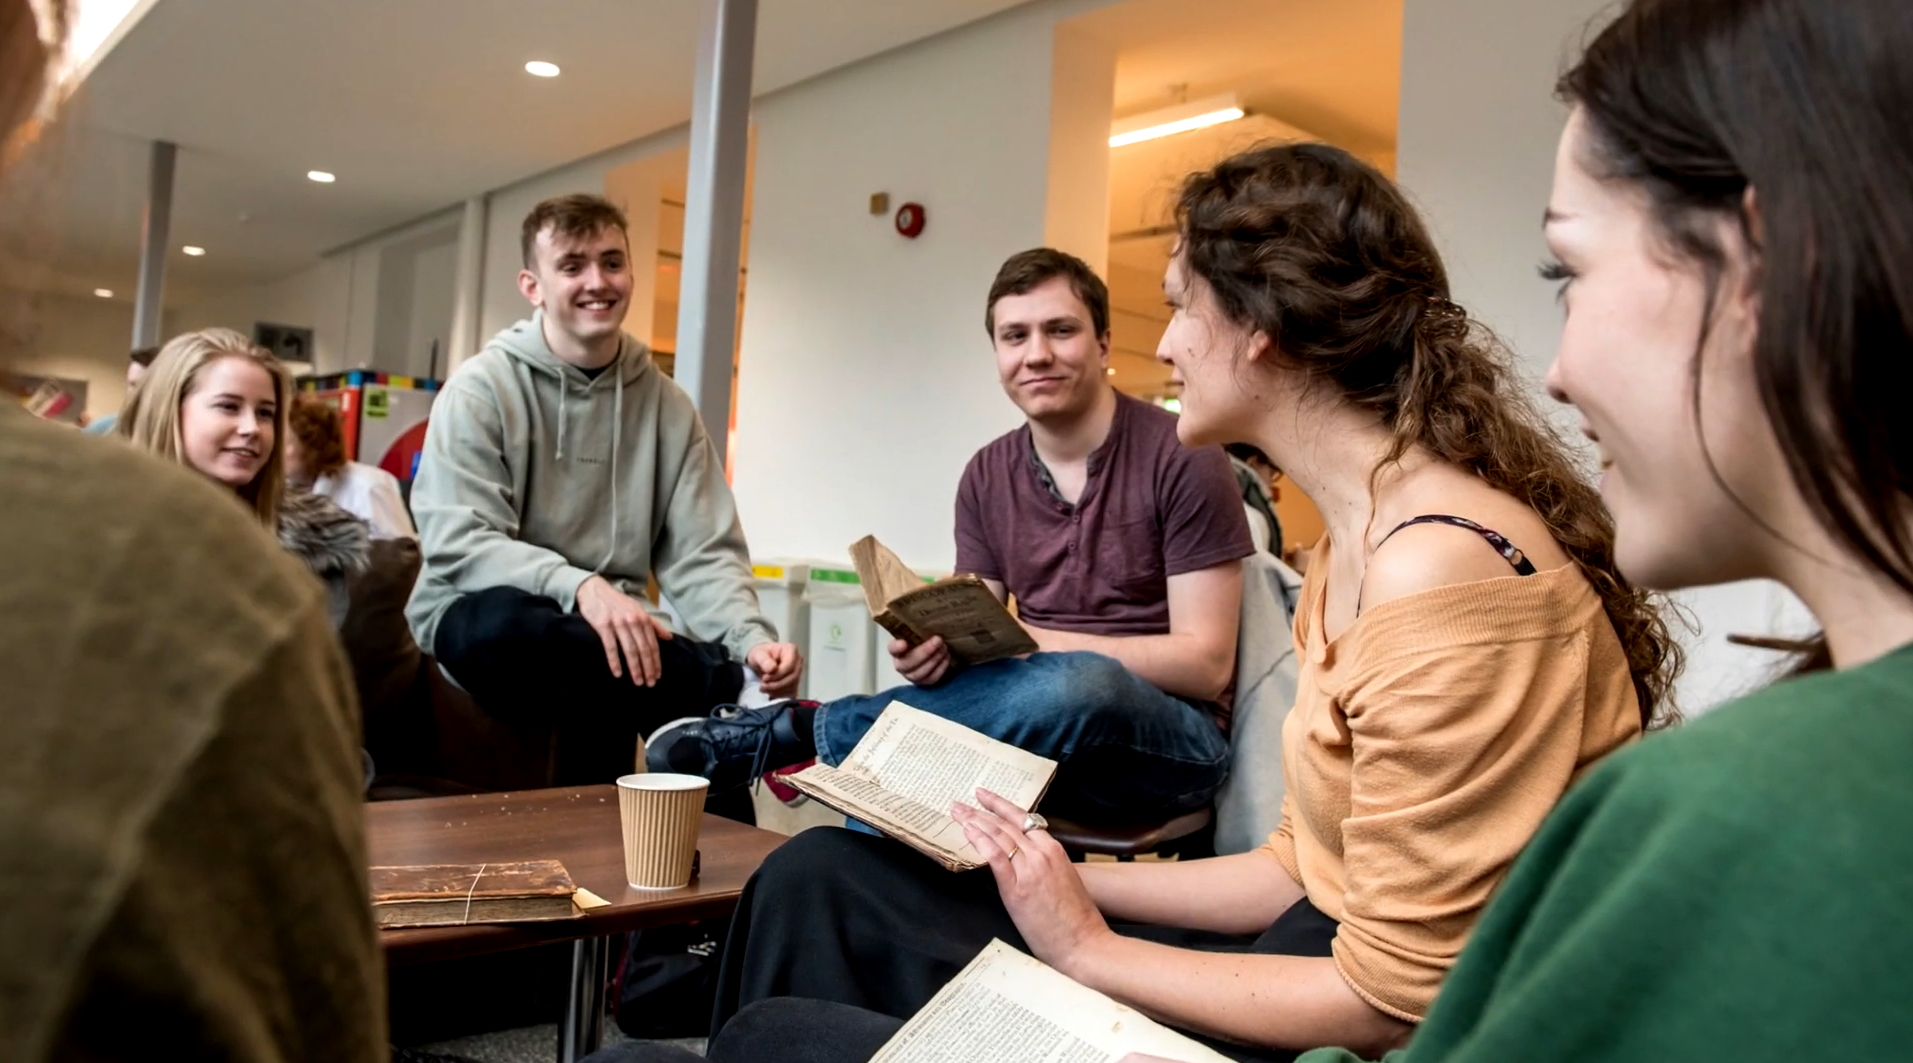 Several students gathered around a café table at Avenue Campus, discussing a book they are all reading.